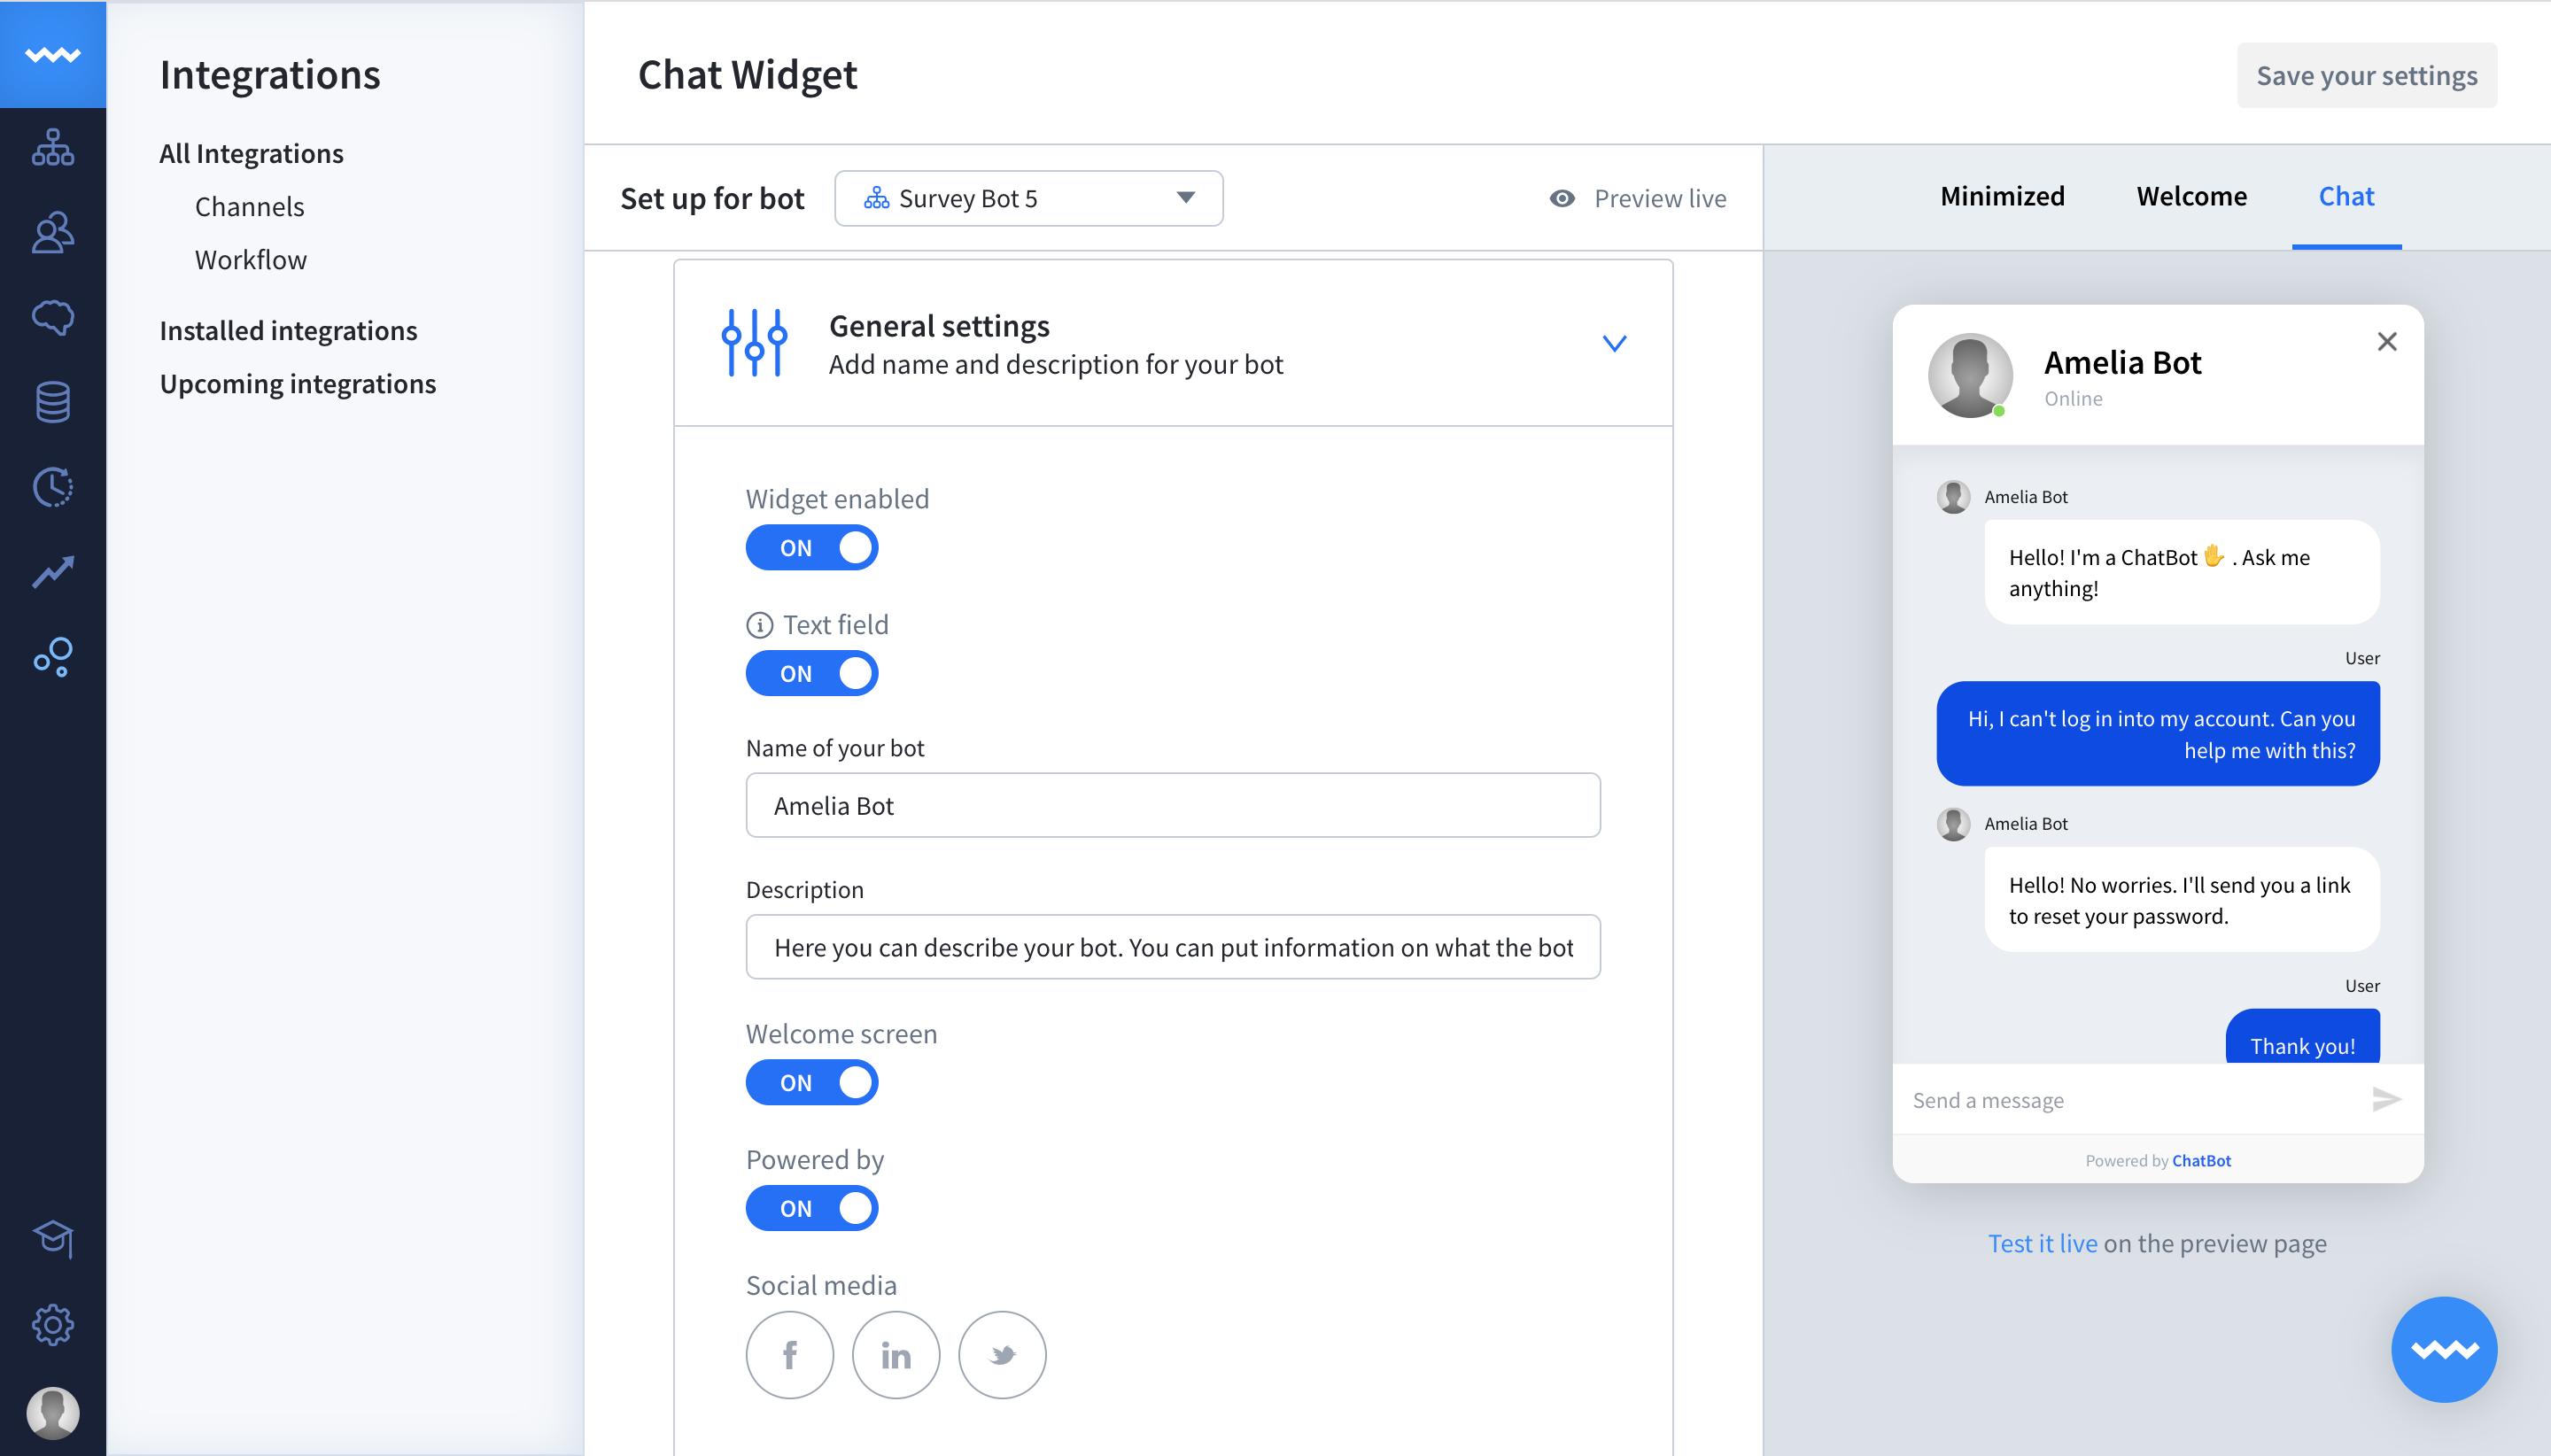 Customization options of the Chat Widget in ChatBot